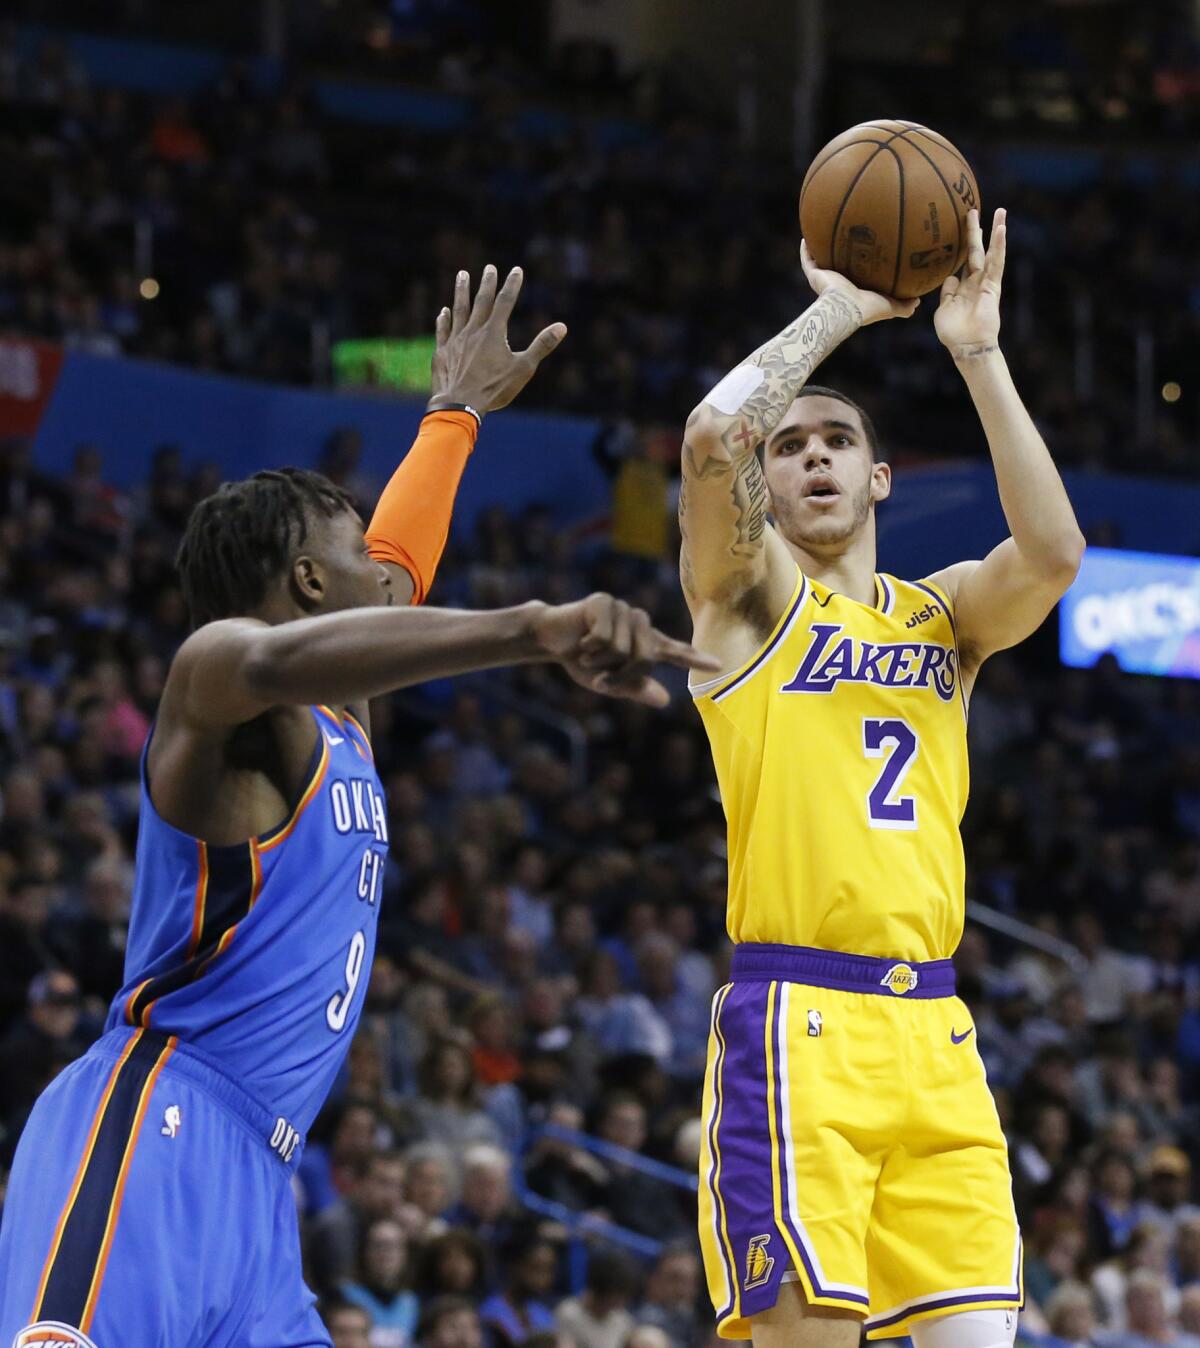 Lonzo Ball puts up a shot against Jerami Grant of the Thunder on Thursday.